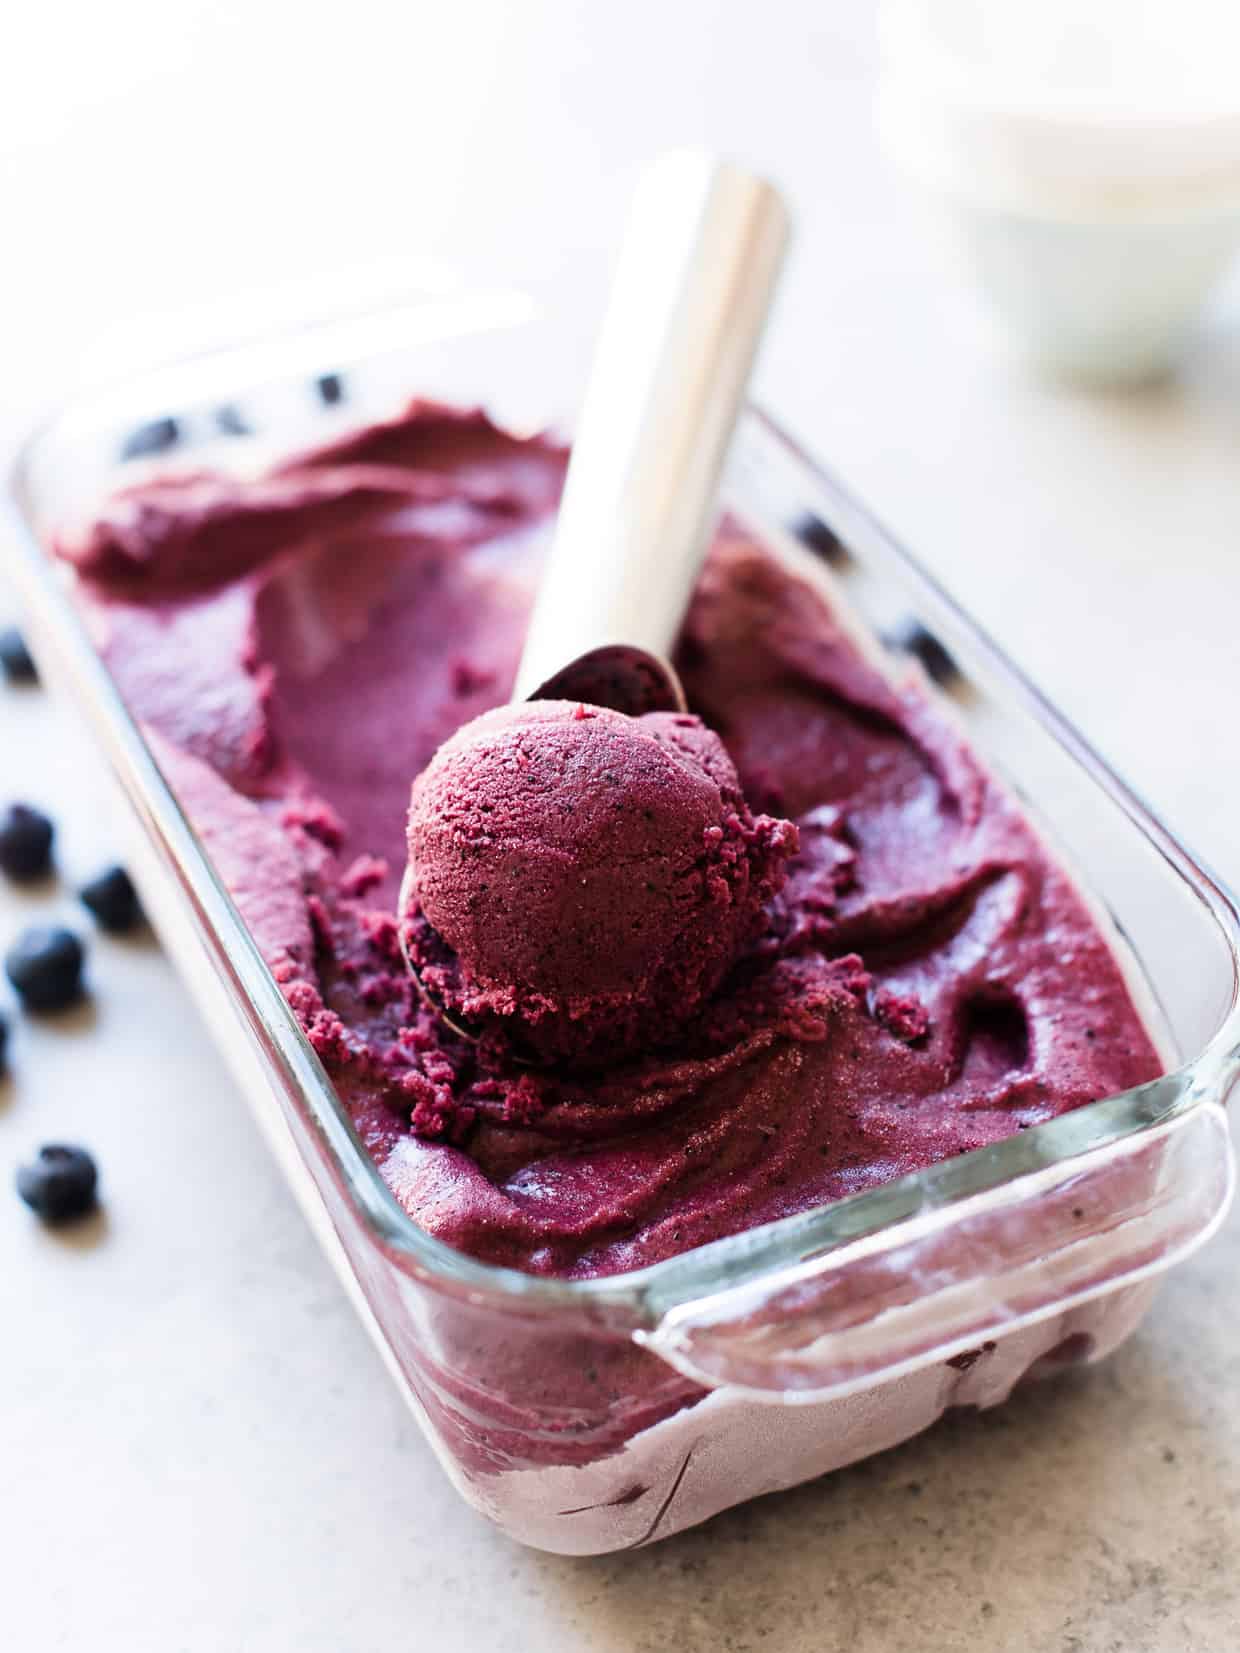 Blueberry Açaí Frozen Yogurt in a glass loaf pan with ice cream scoop and blueberries for garnish.